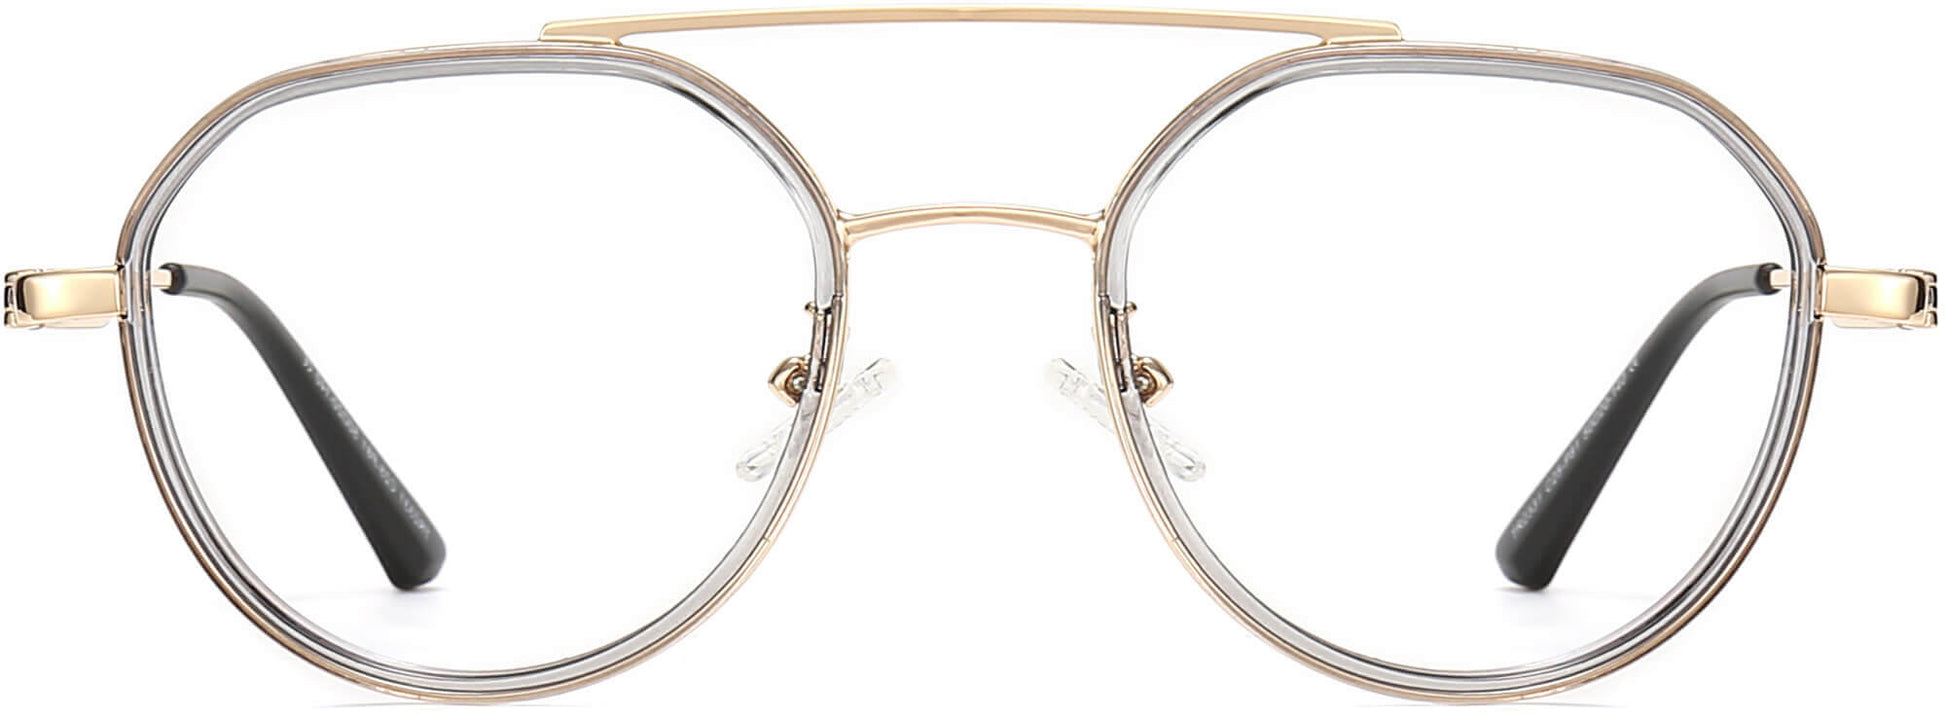 Francisco Geometric Gold Eyeglasses from ANRRI, front view